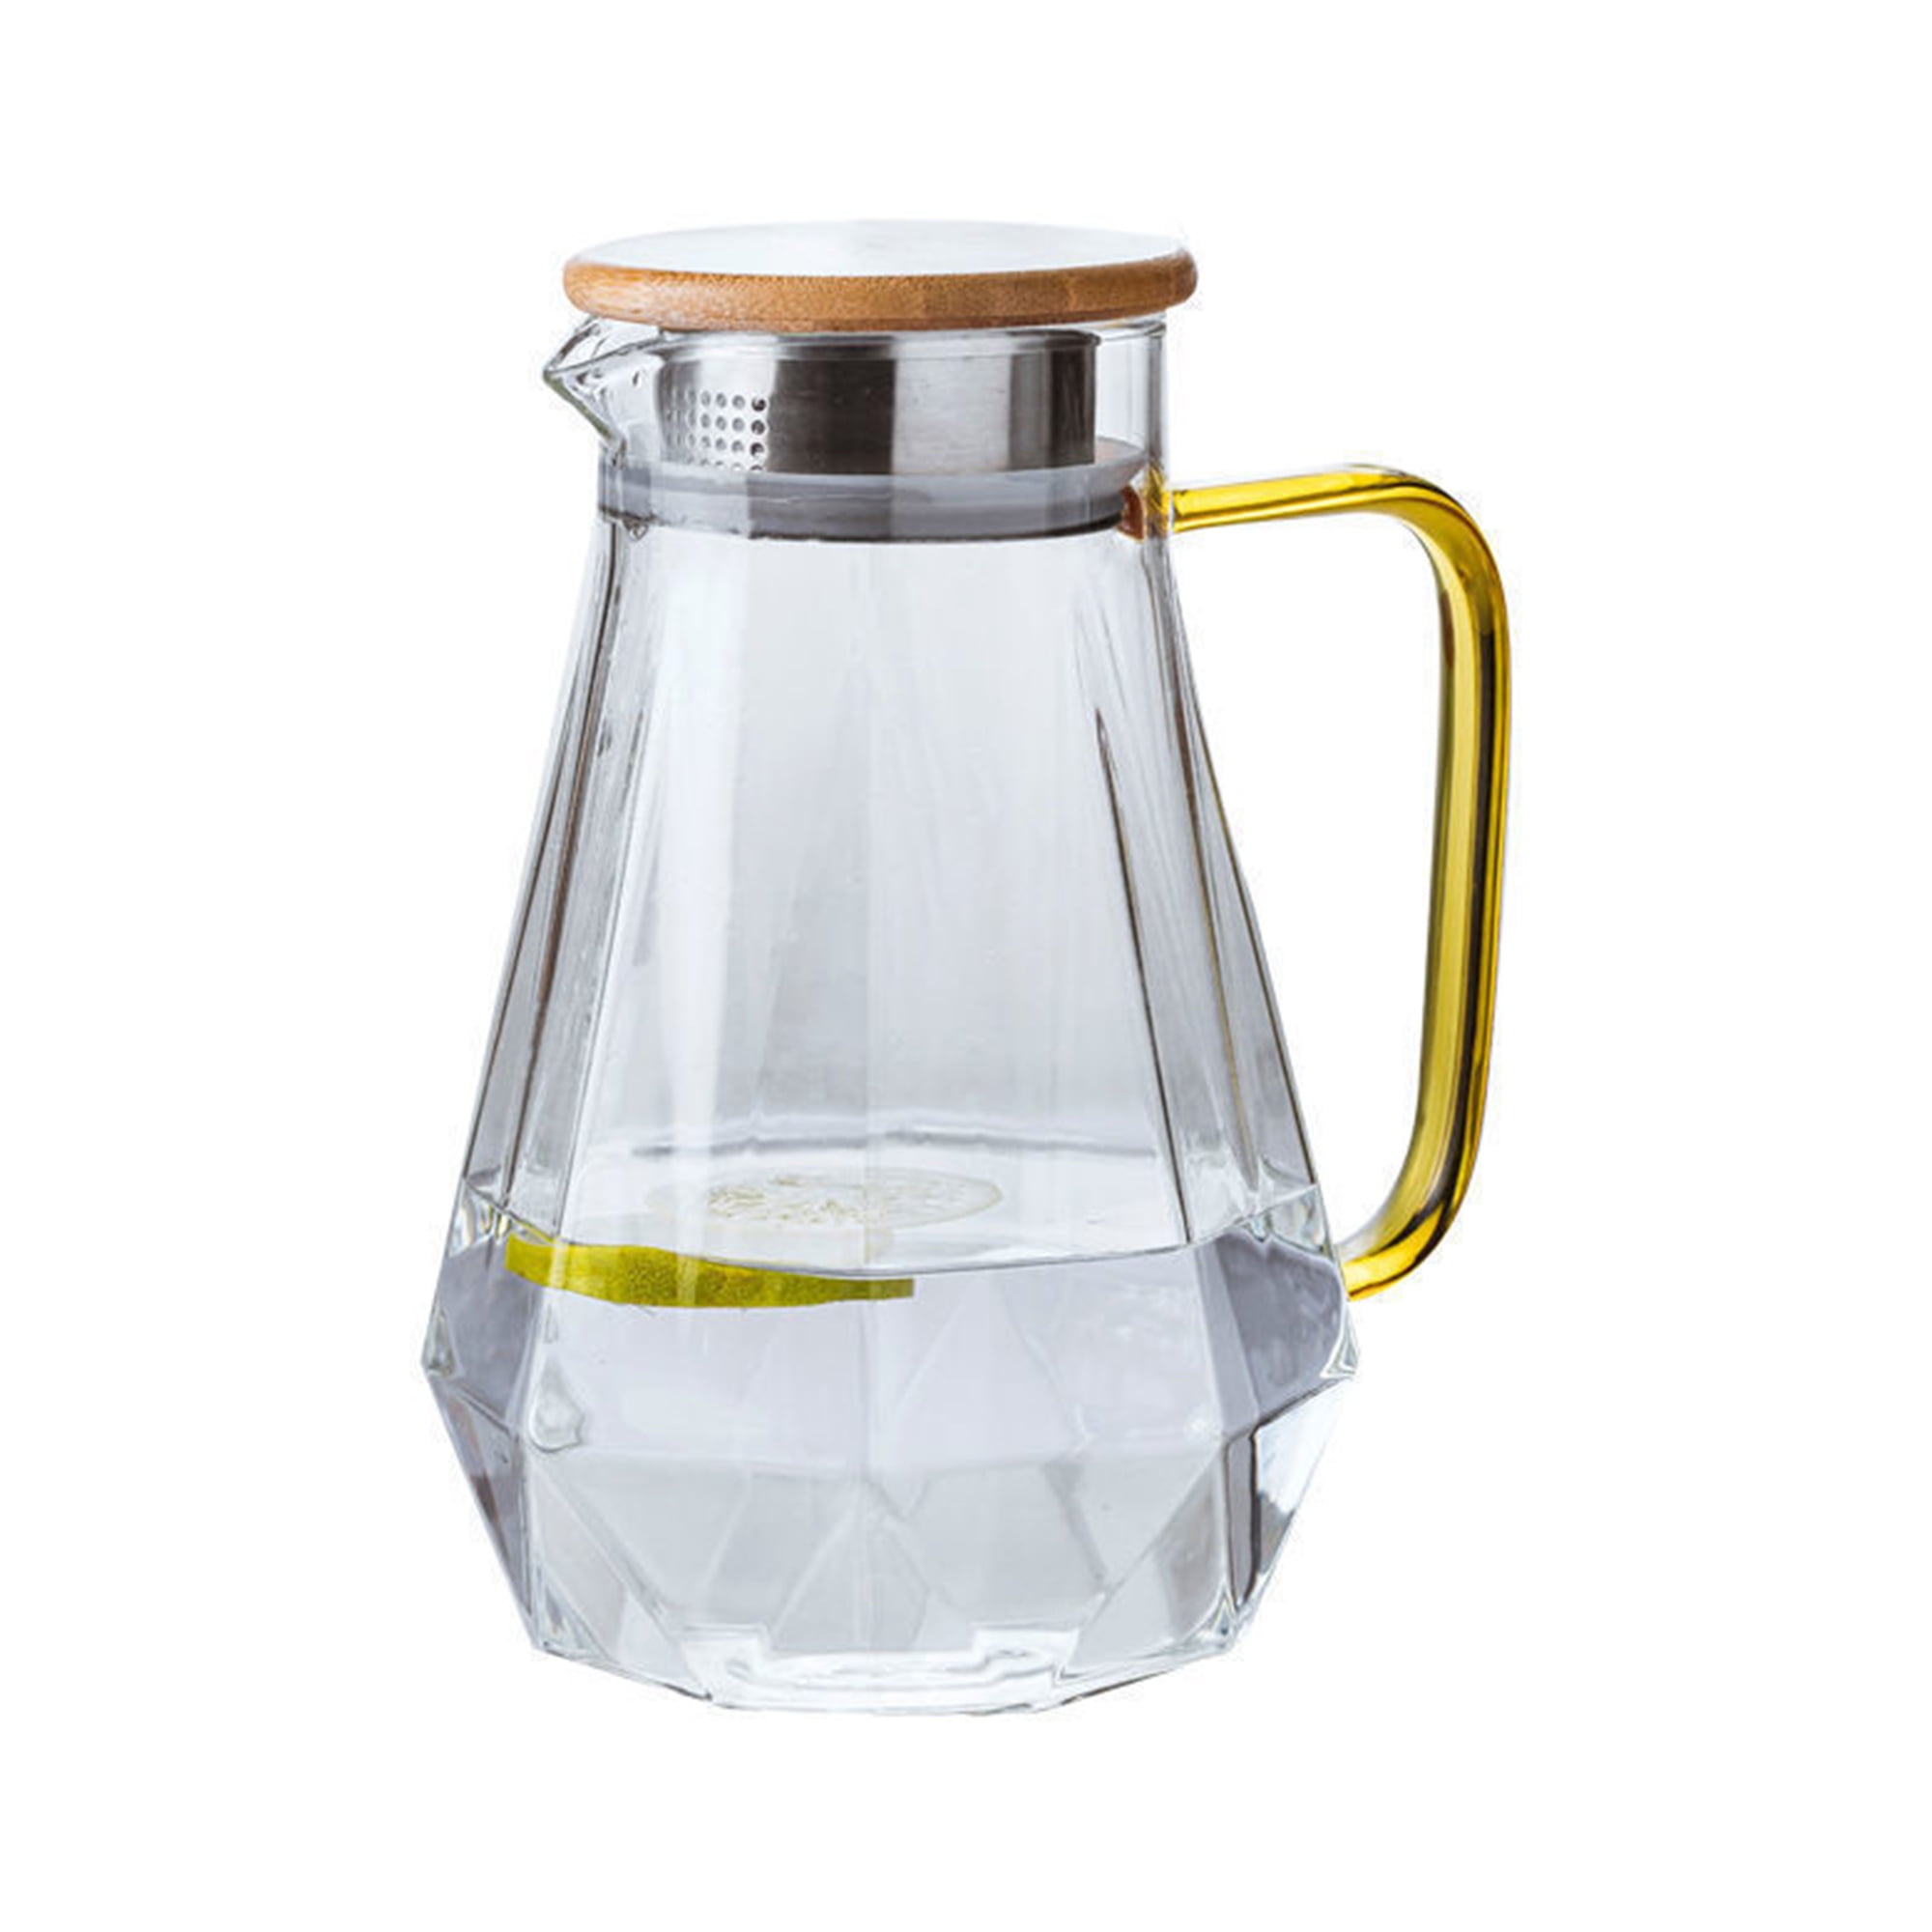 Simax SMALL Glass Pitcher With Spout: Borosilicate Glass Pitchers With  Handle - Glass Drink Pitcher - Margarita Pitcher - Sangria Pitchers -  Pitchers Beverage Pitchers - 1 Quart Pitcher 